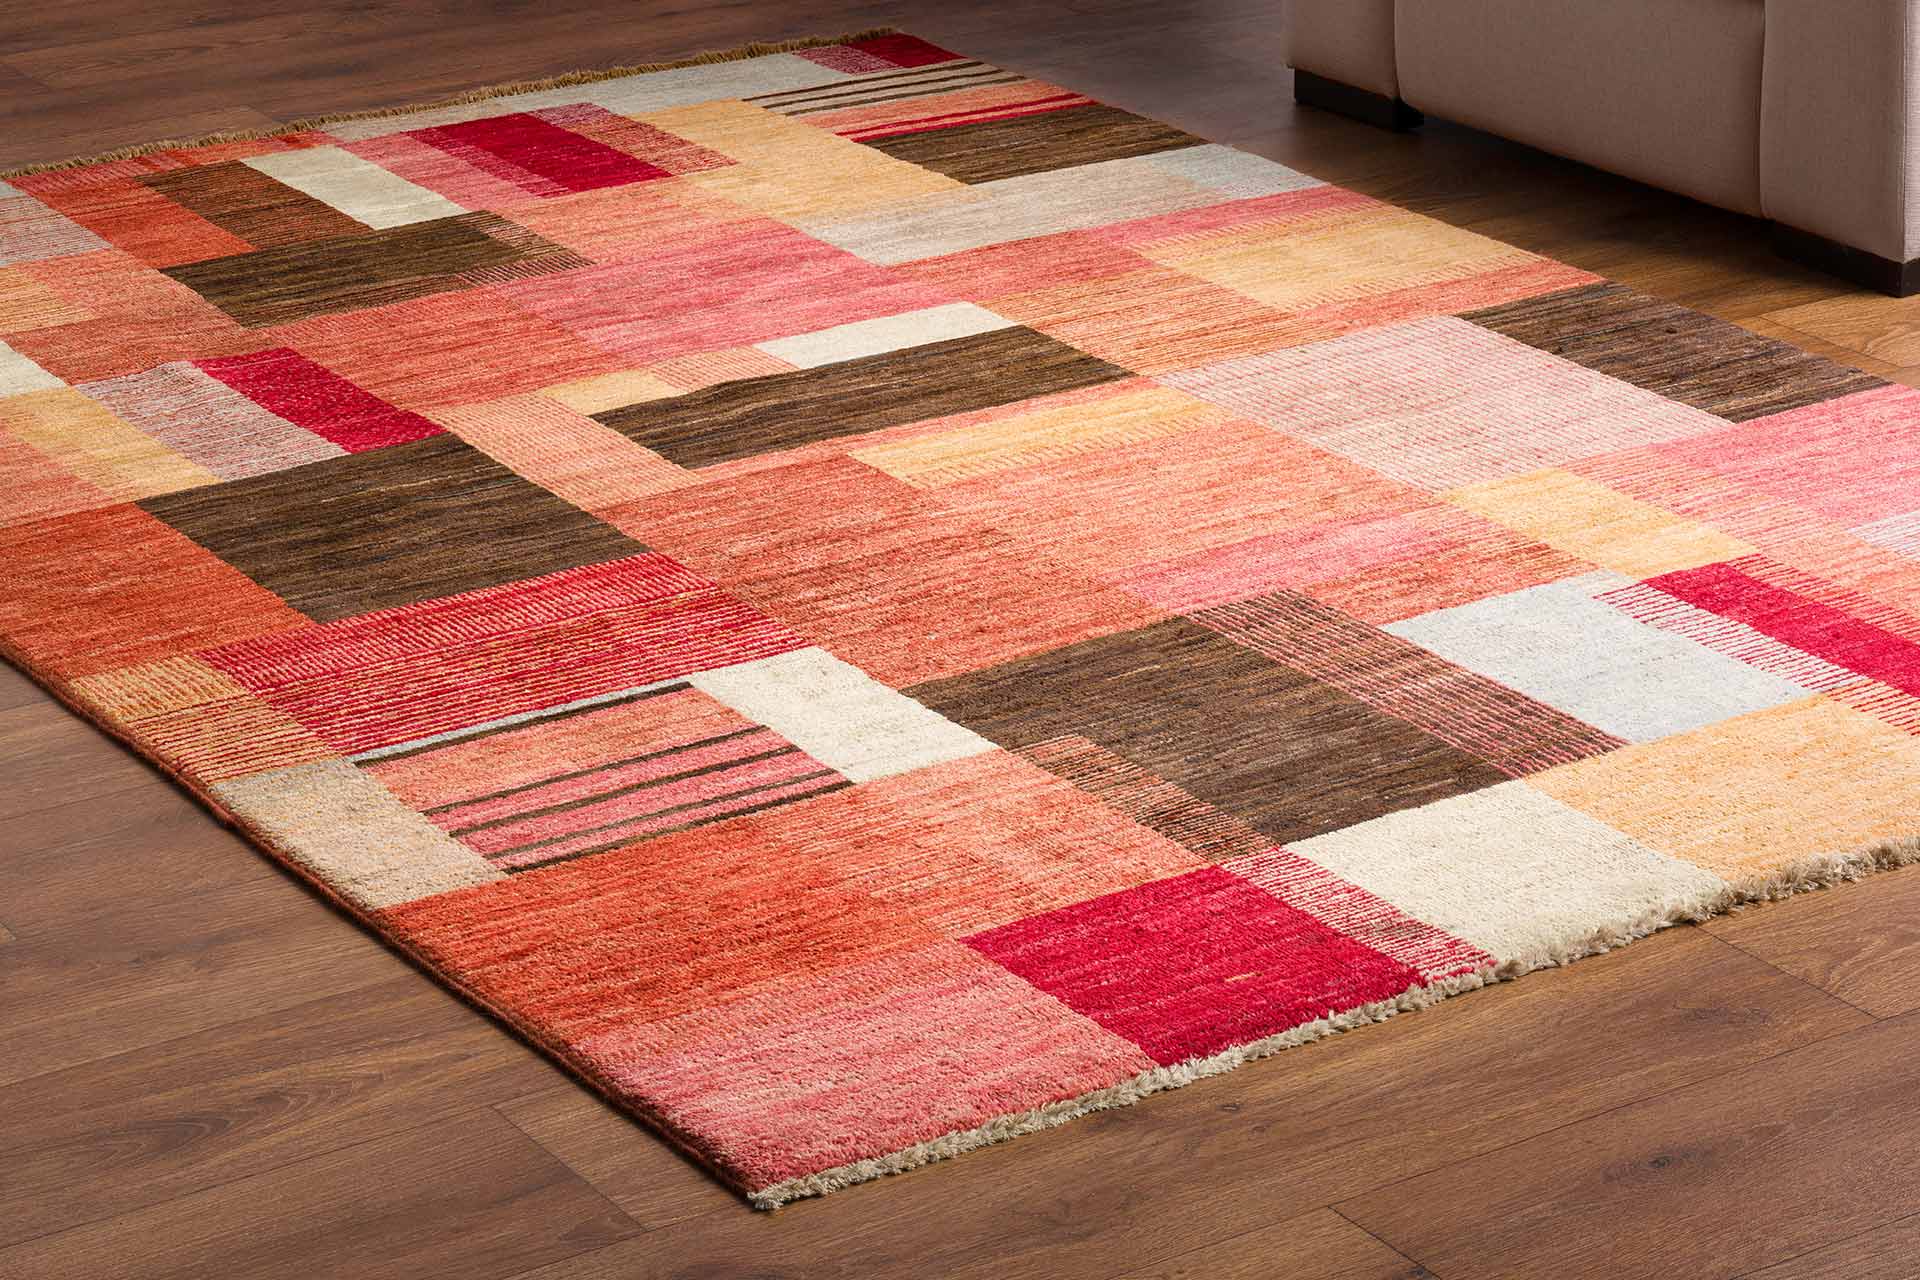 Rugs For Sale in Middleton | Buy Rugs Online | Lifestyle Carpets